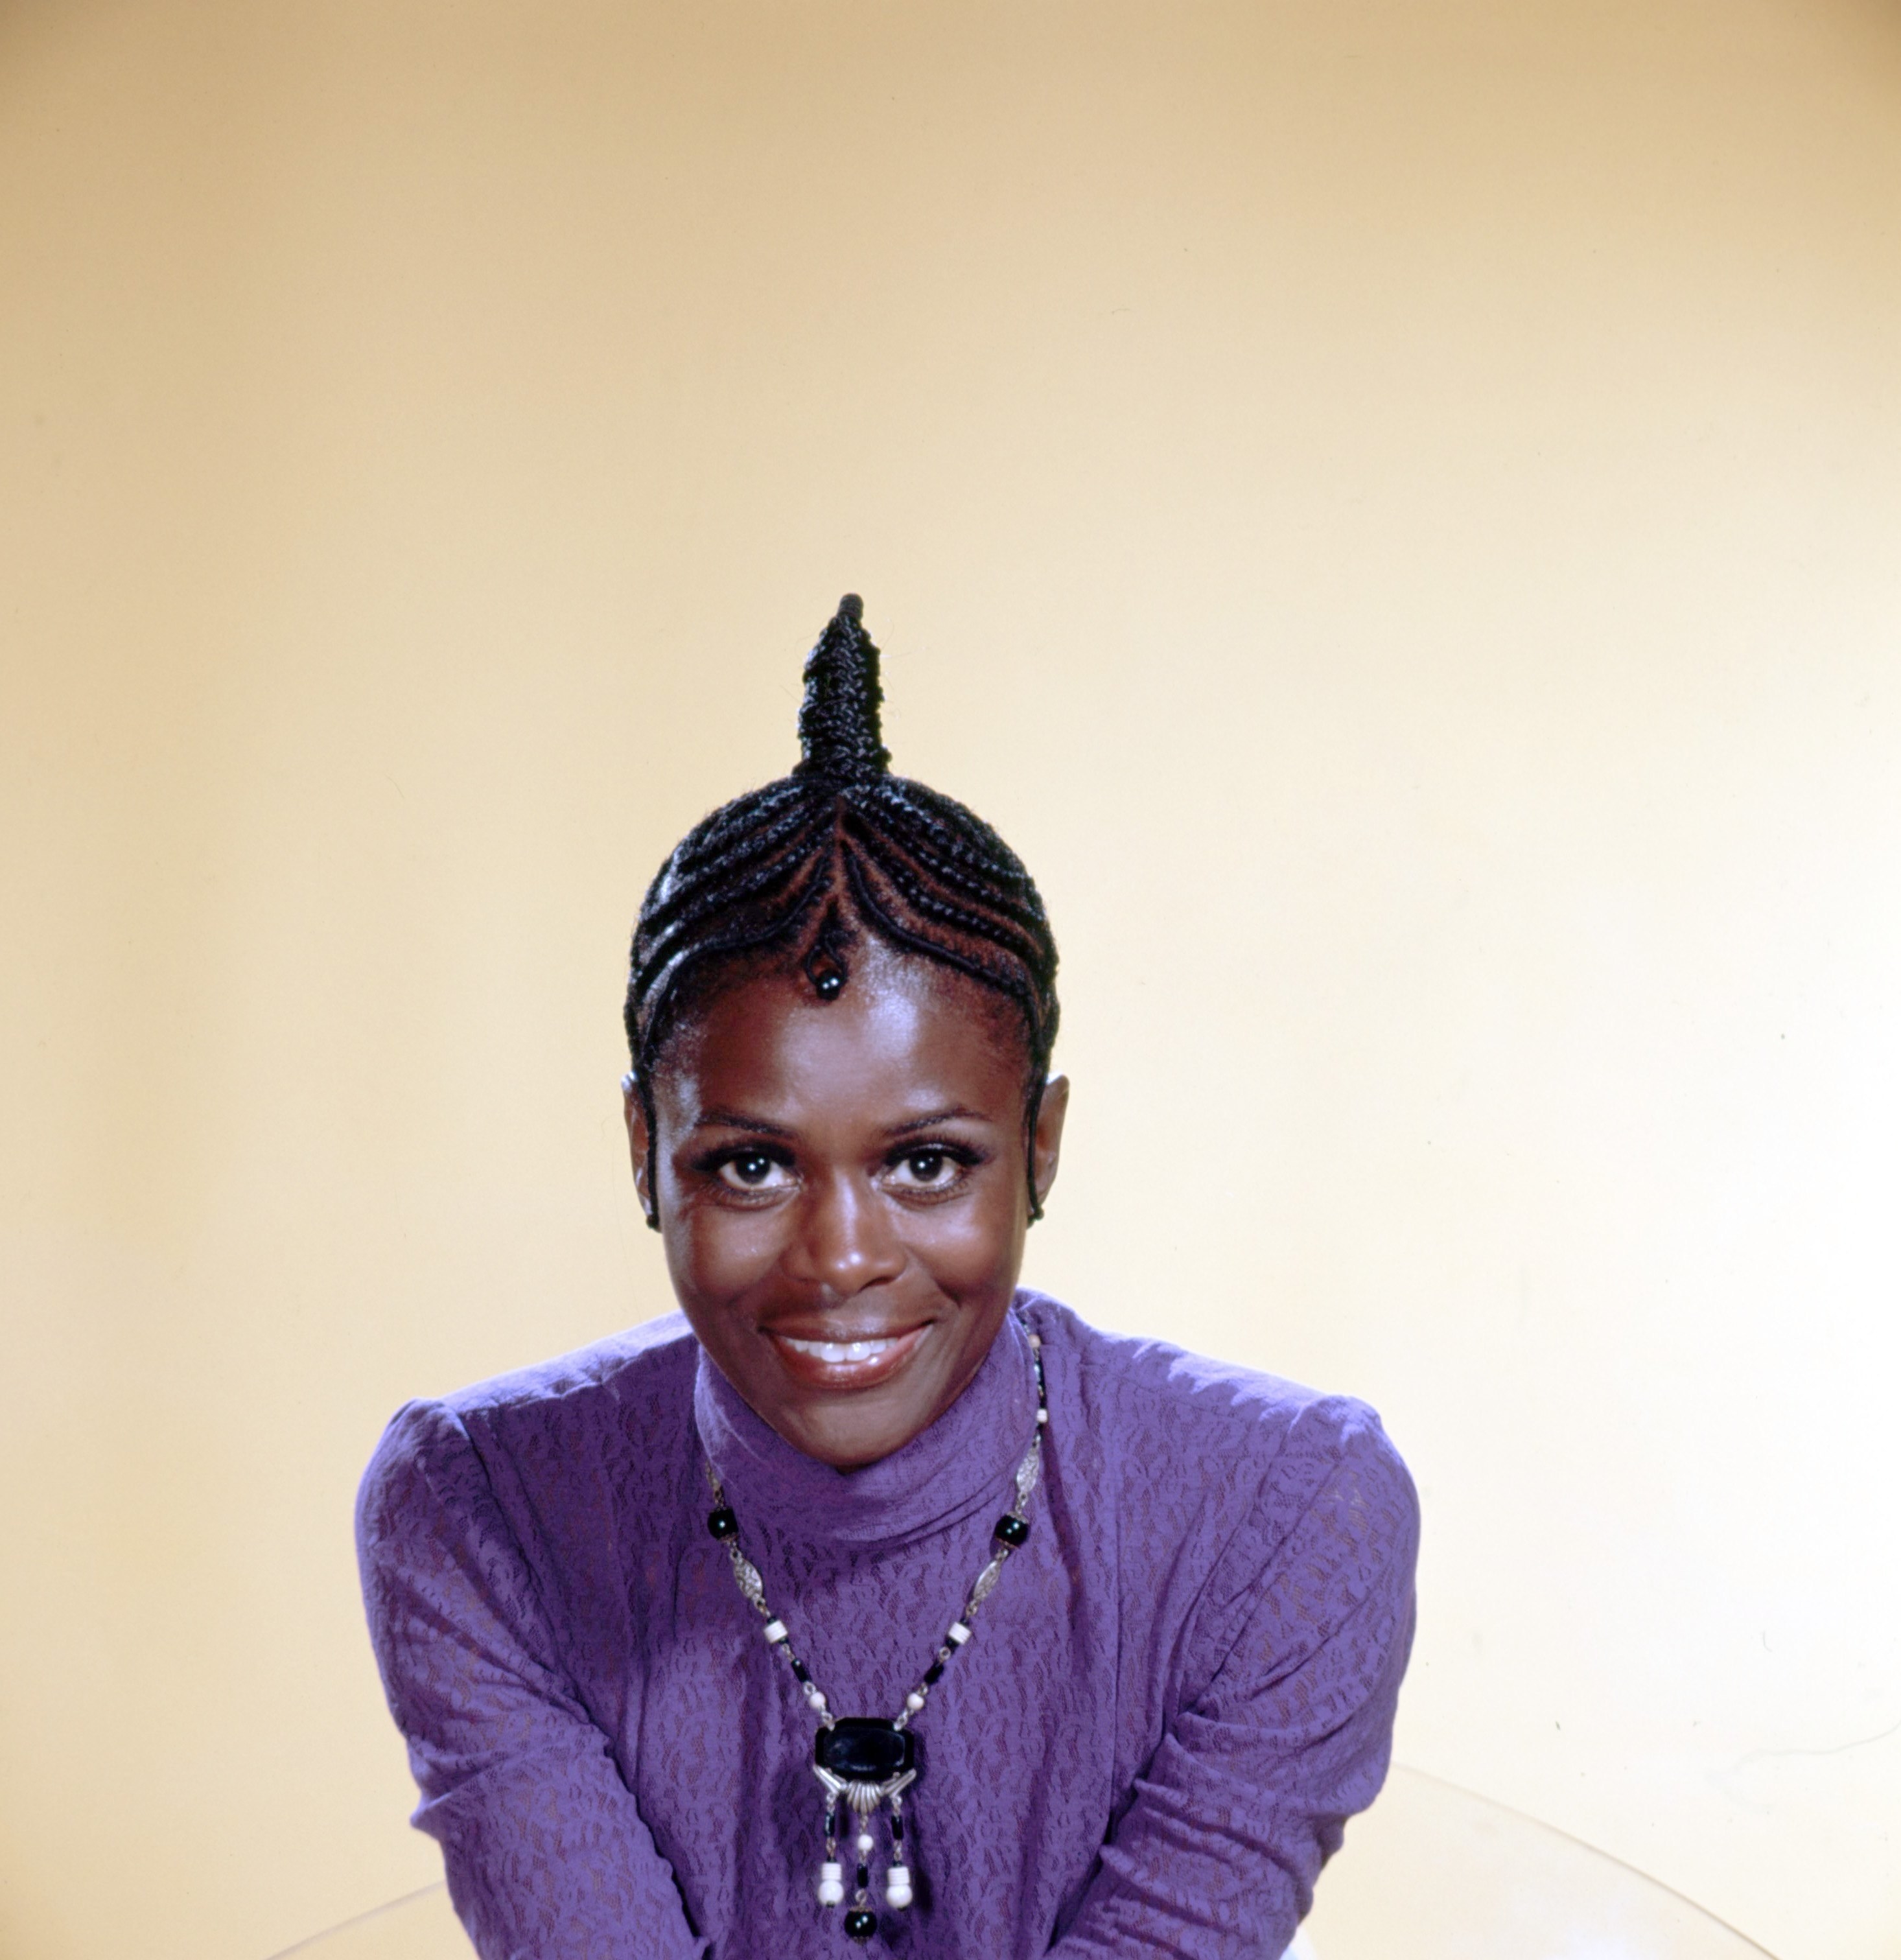 Cicely Tyson in cornrows and a turtleneck smiling at the camera